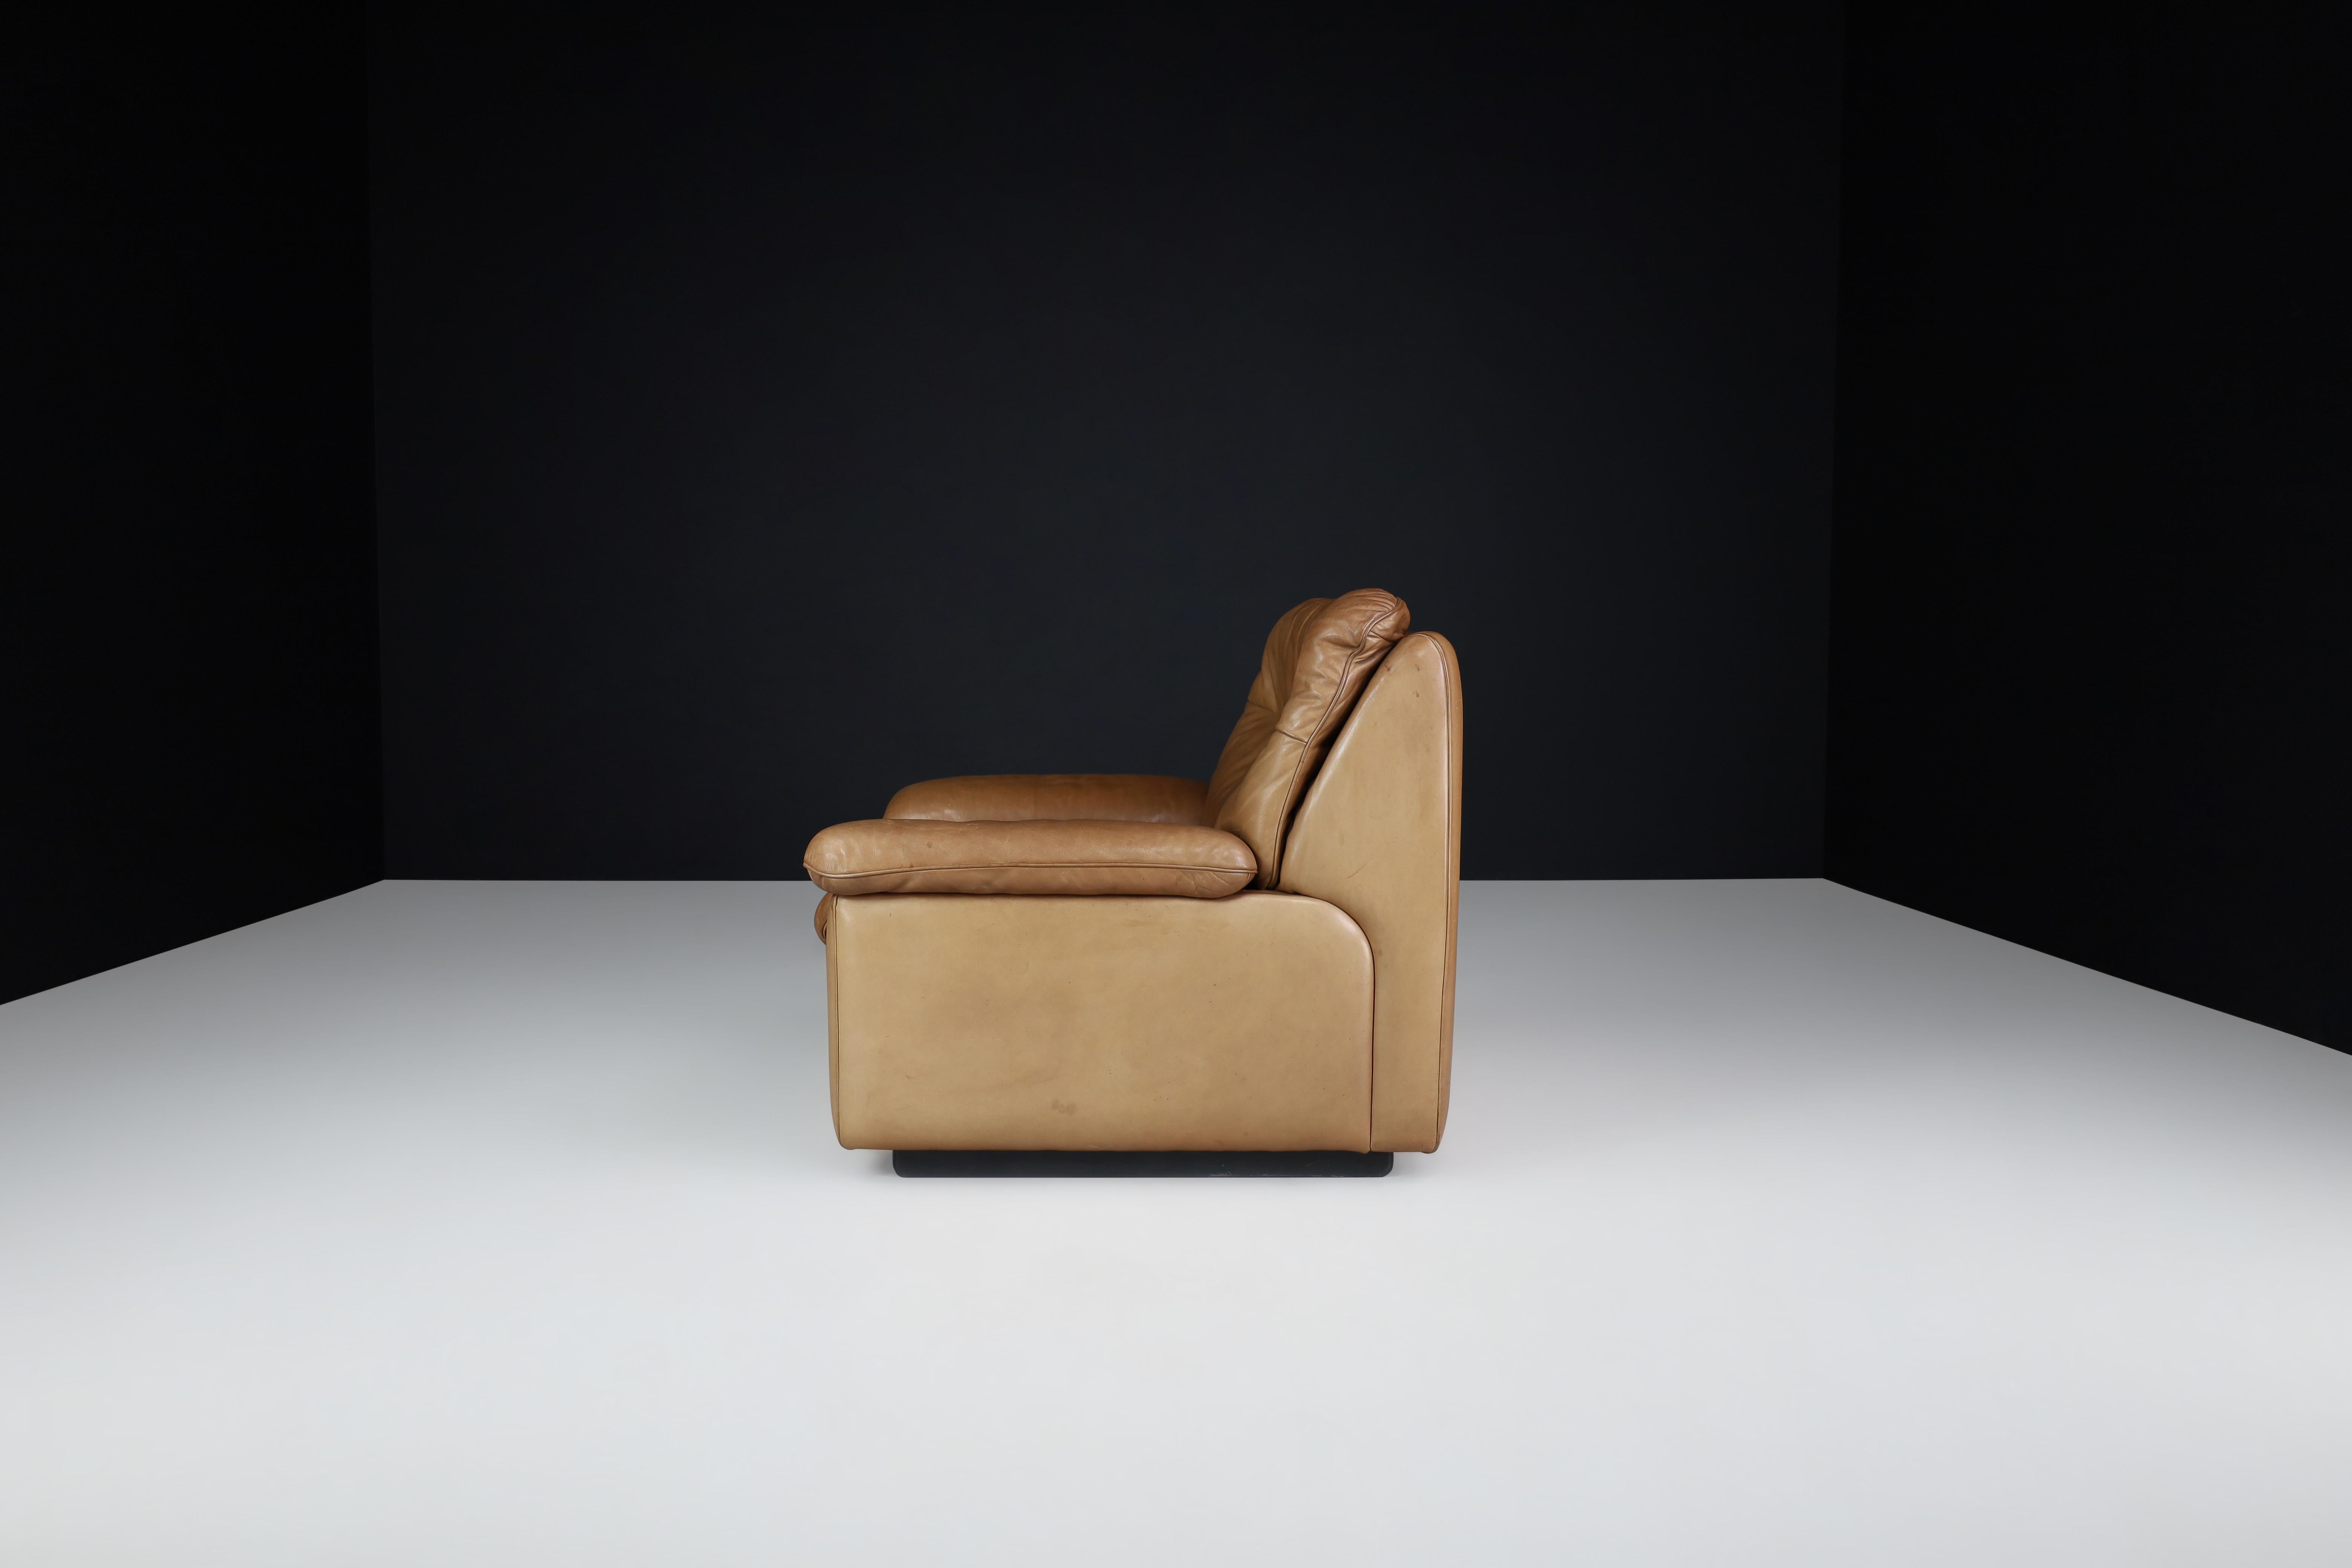 Swiss De Sede Ds 63 Lounge Chair in Patinated Leather, Switzerland, 1970s For Sale